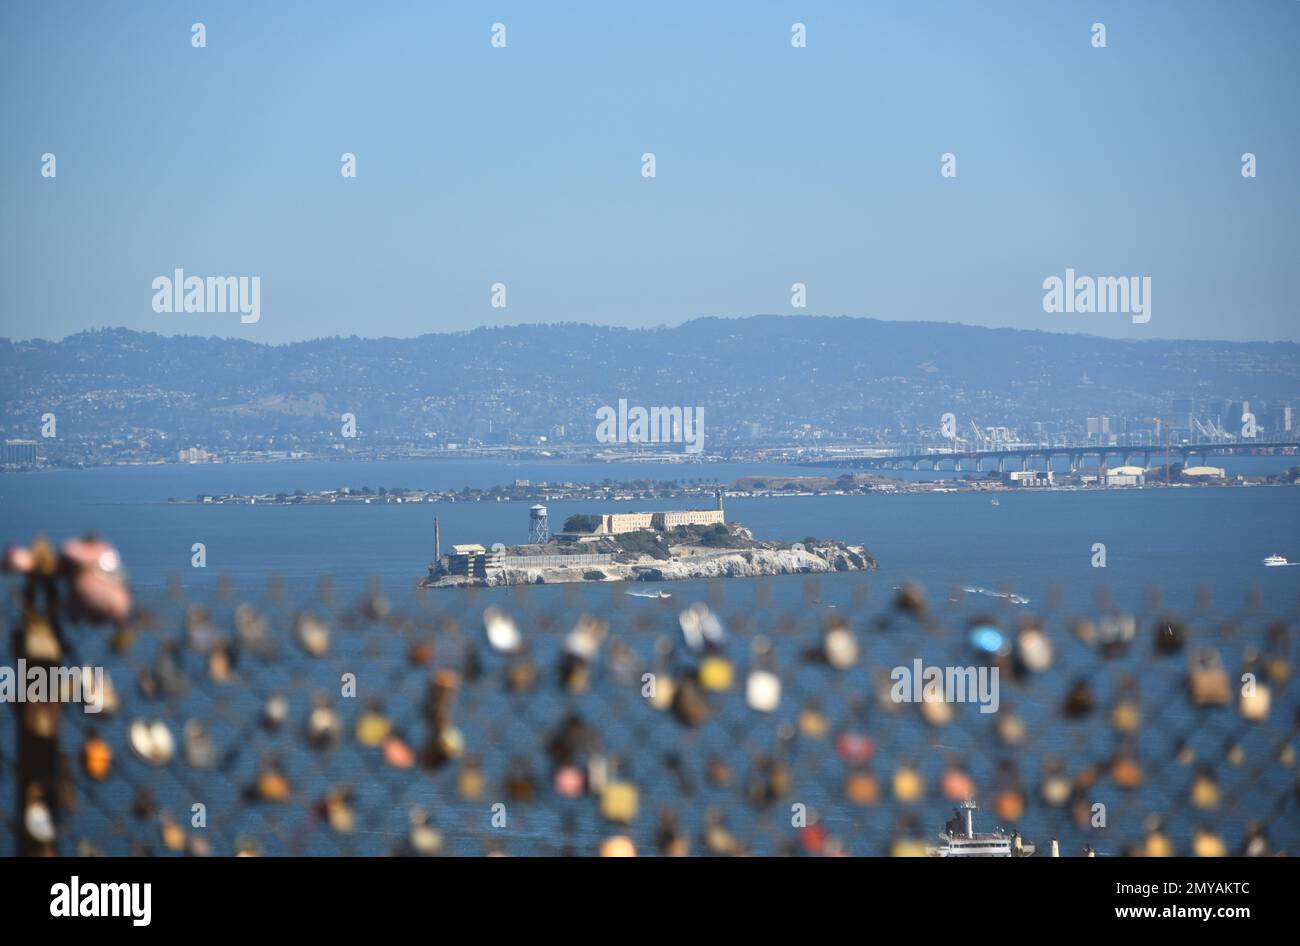 Panoramic overview, in large format, of the San Francisco bay featuring Alcatraz island, Treasure island and Bay bridge, with love locks. Stock Photo